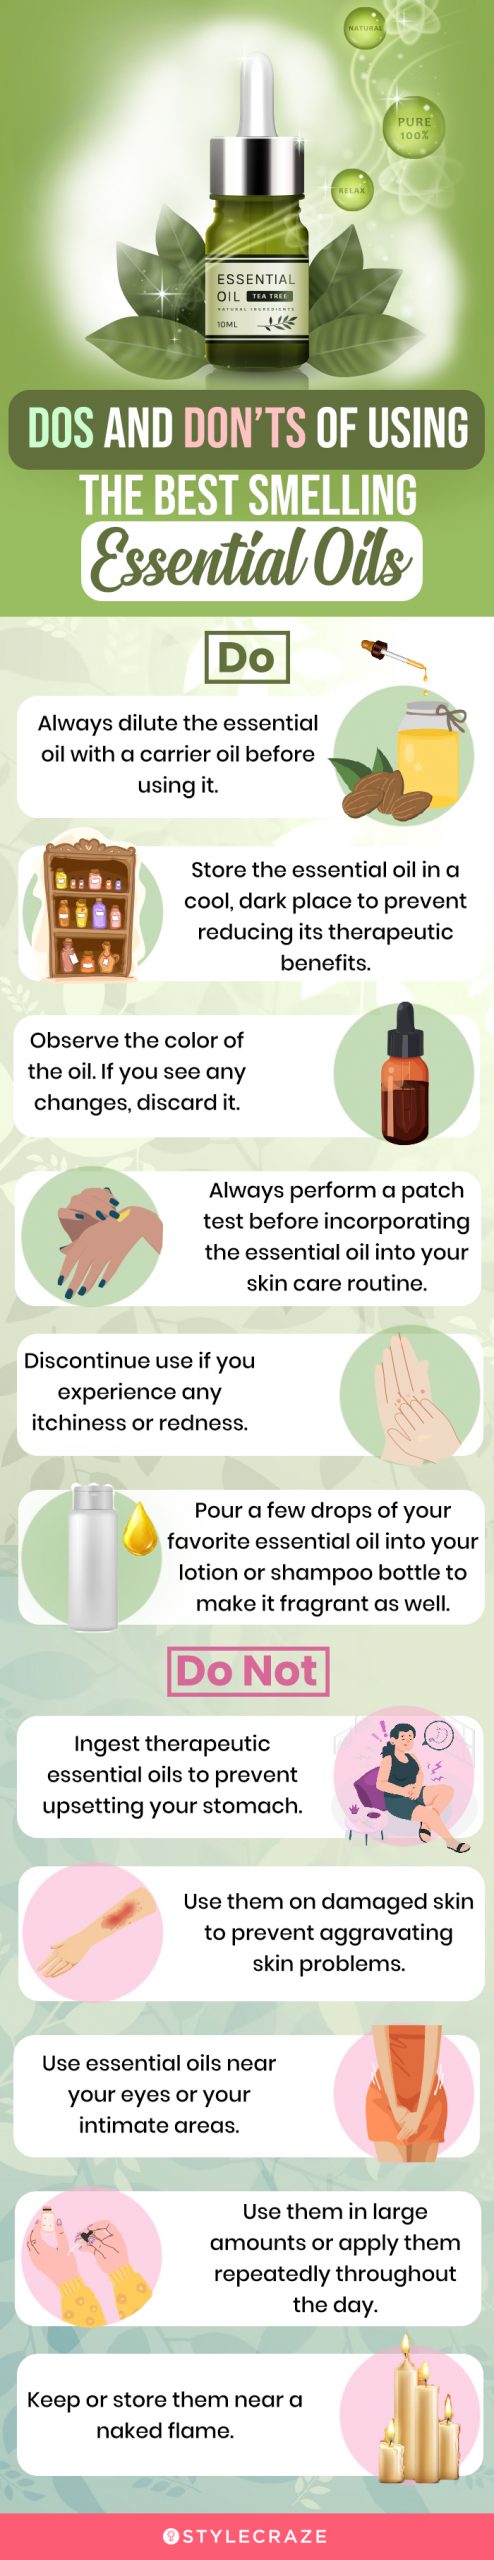 Dos And Don’ts Of Using The Best Smelling Essential Oils (infographic)